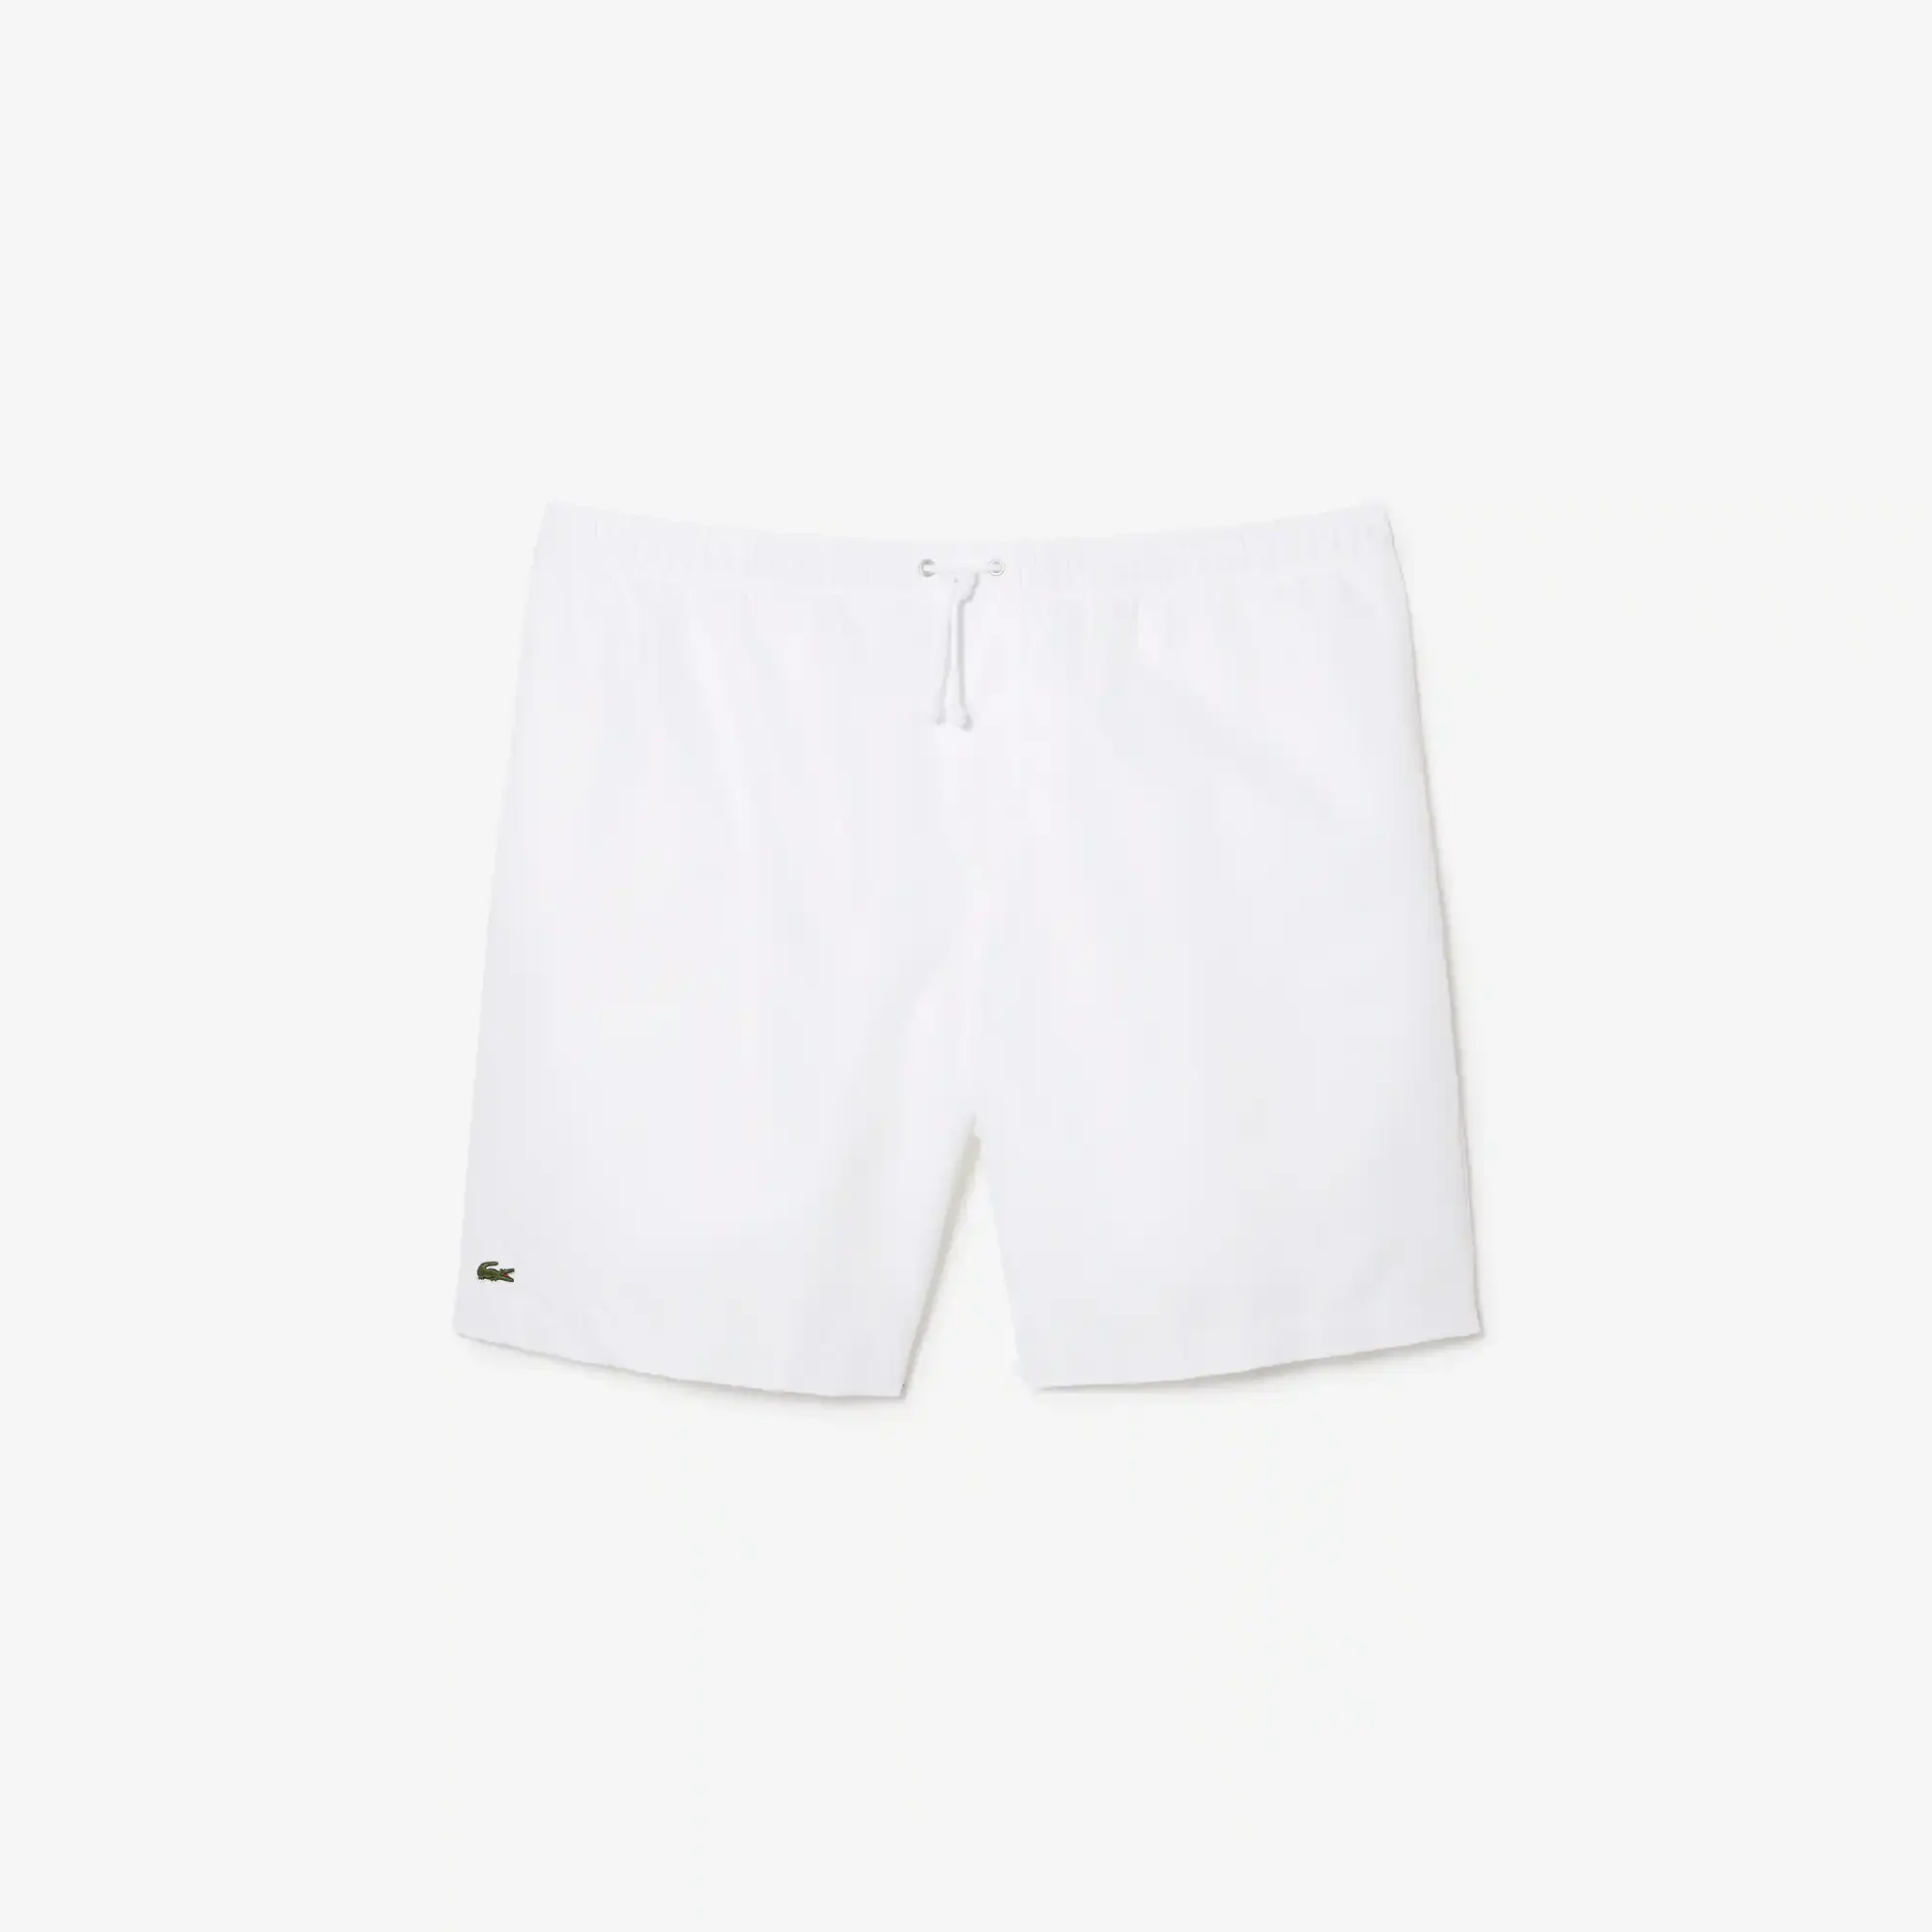 Lacoste Men’s SPORT Big Fit Relaxed Fit Lined Shorts. 2